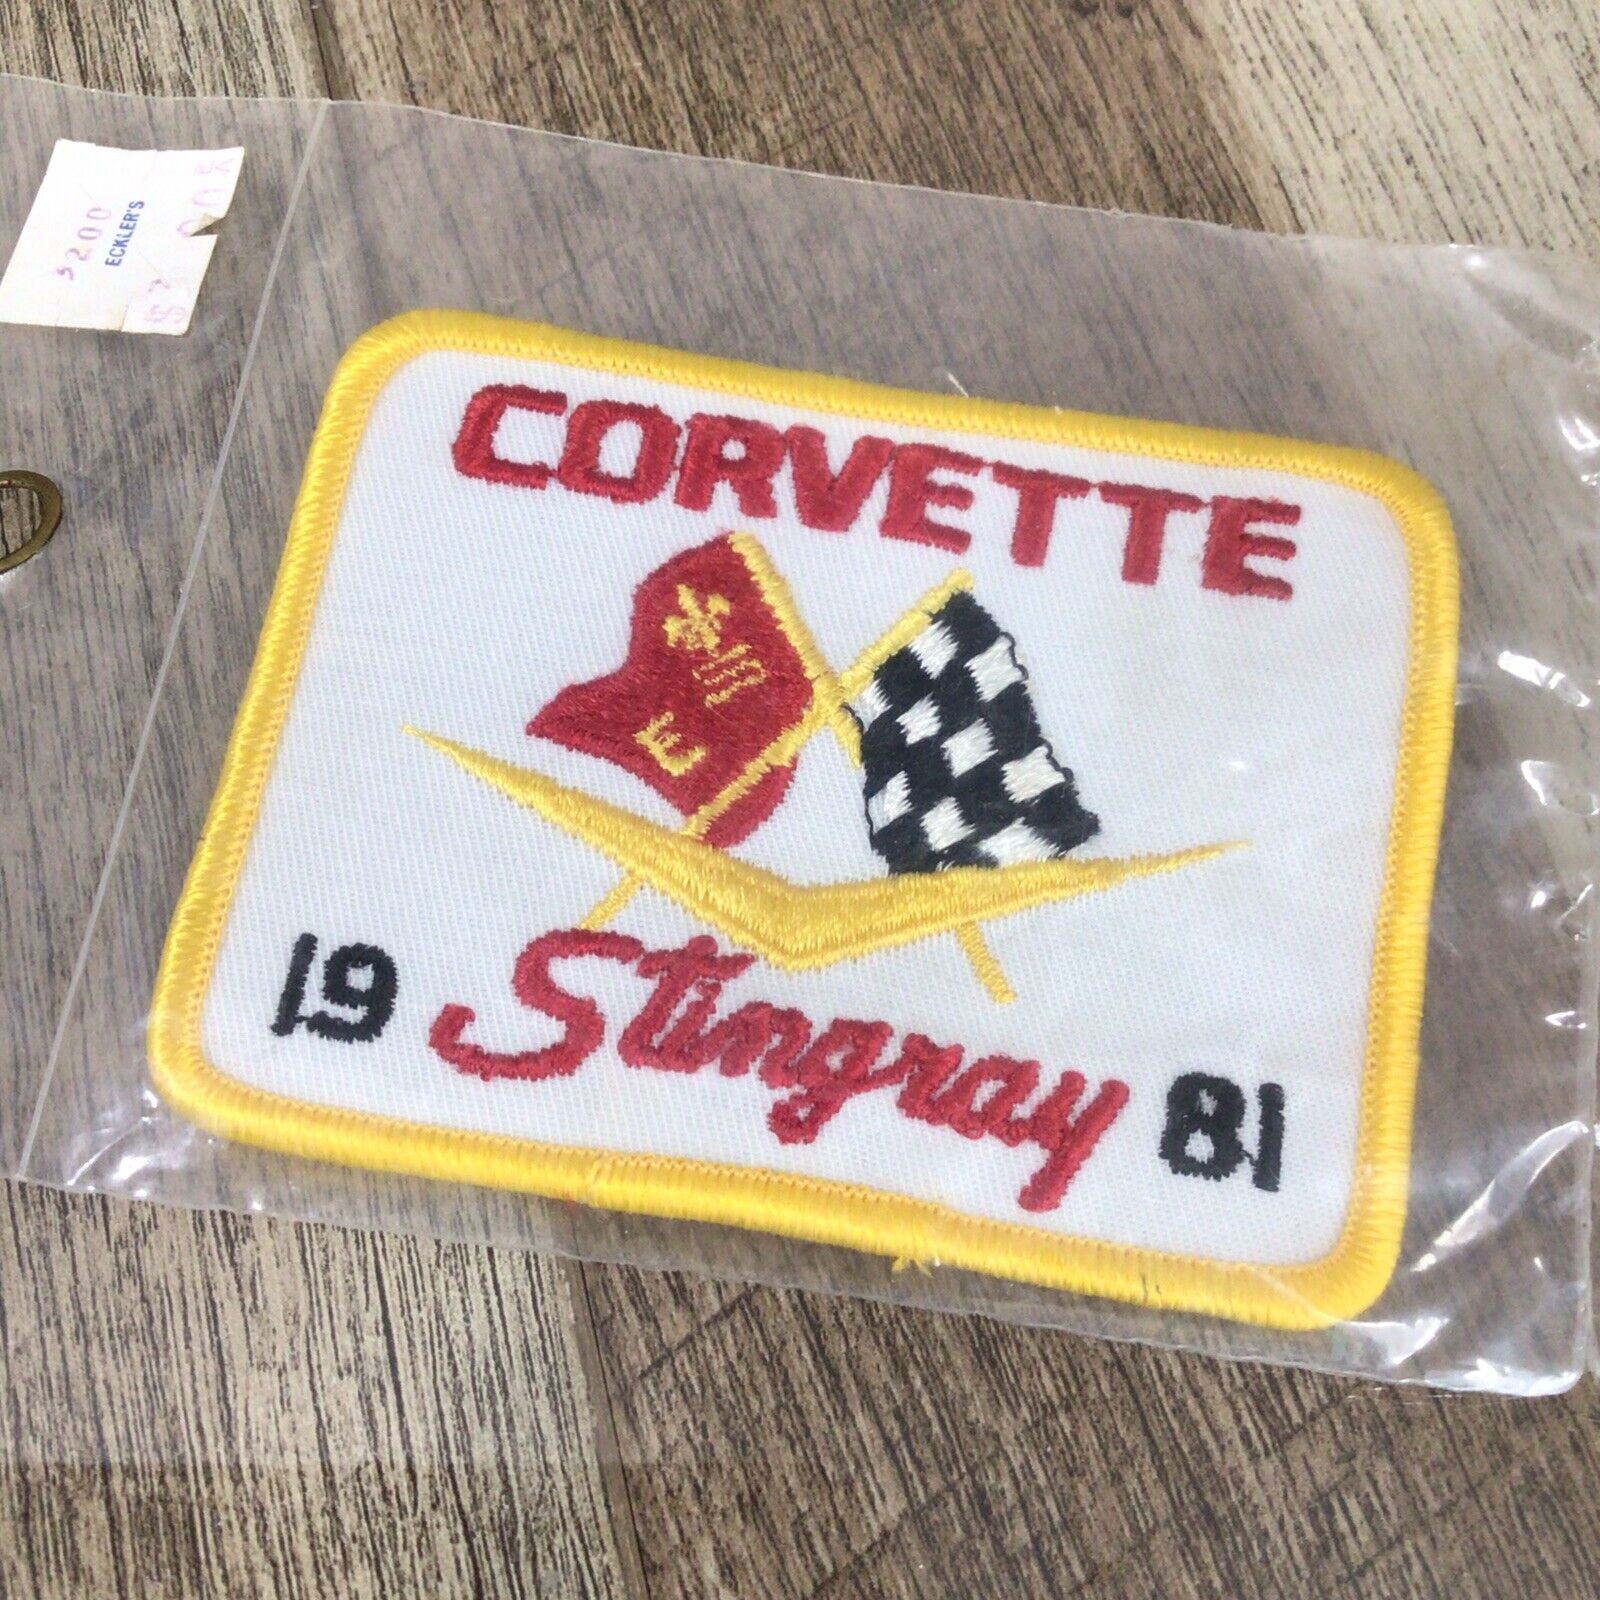 Vintage Corvette Stingray 1981 Embroidered Patch New Sealed in Original Package